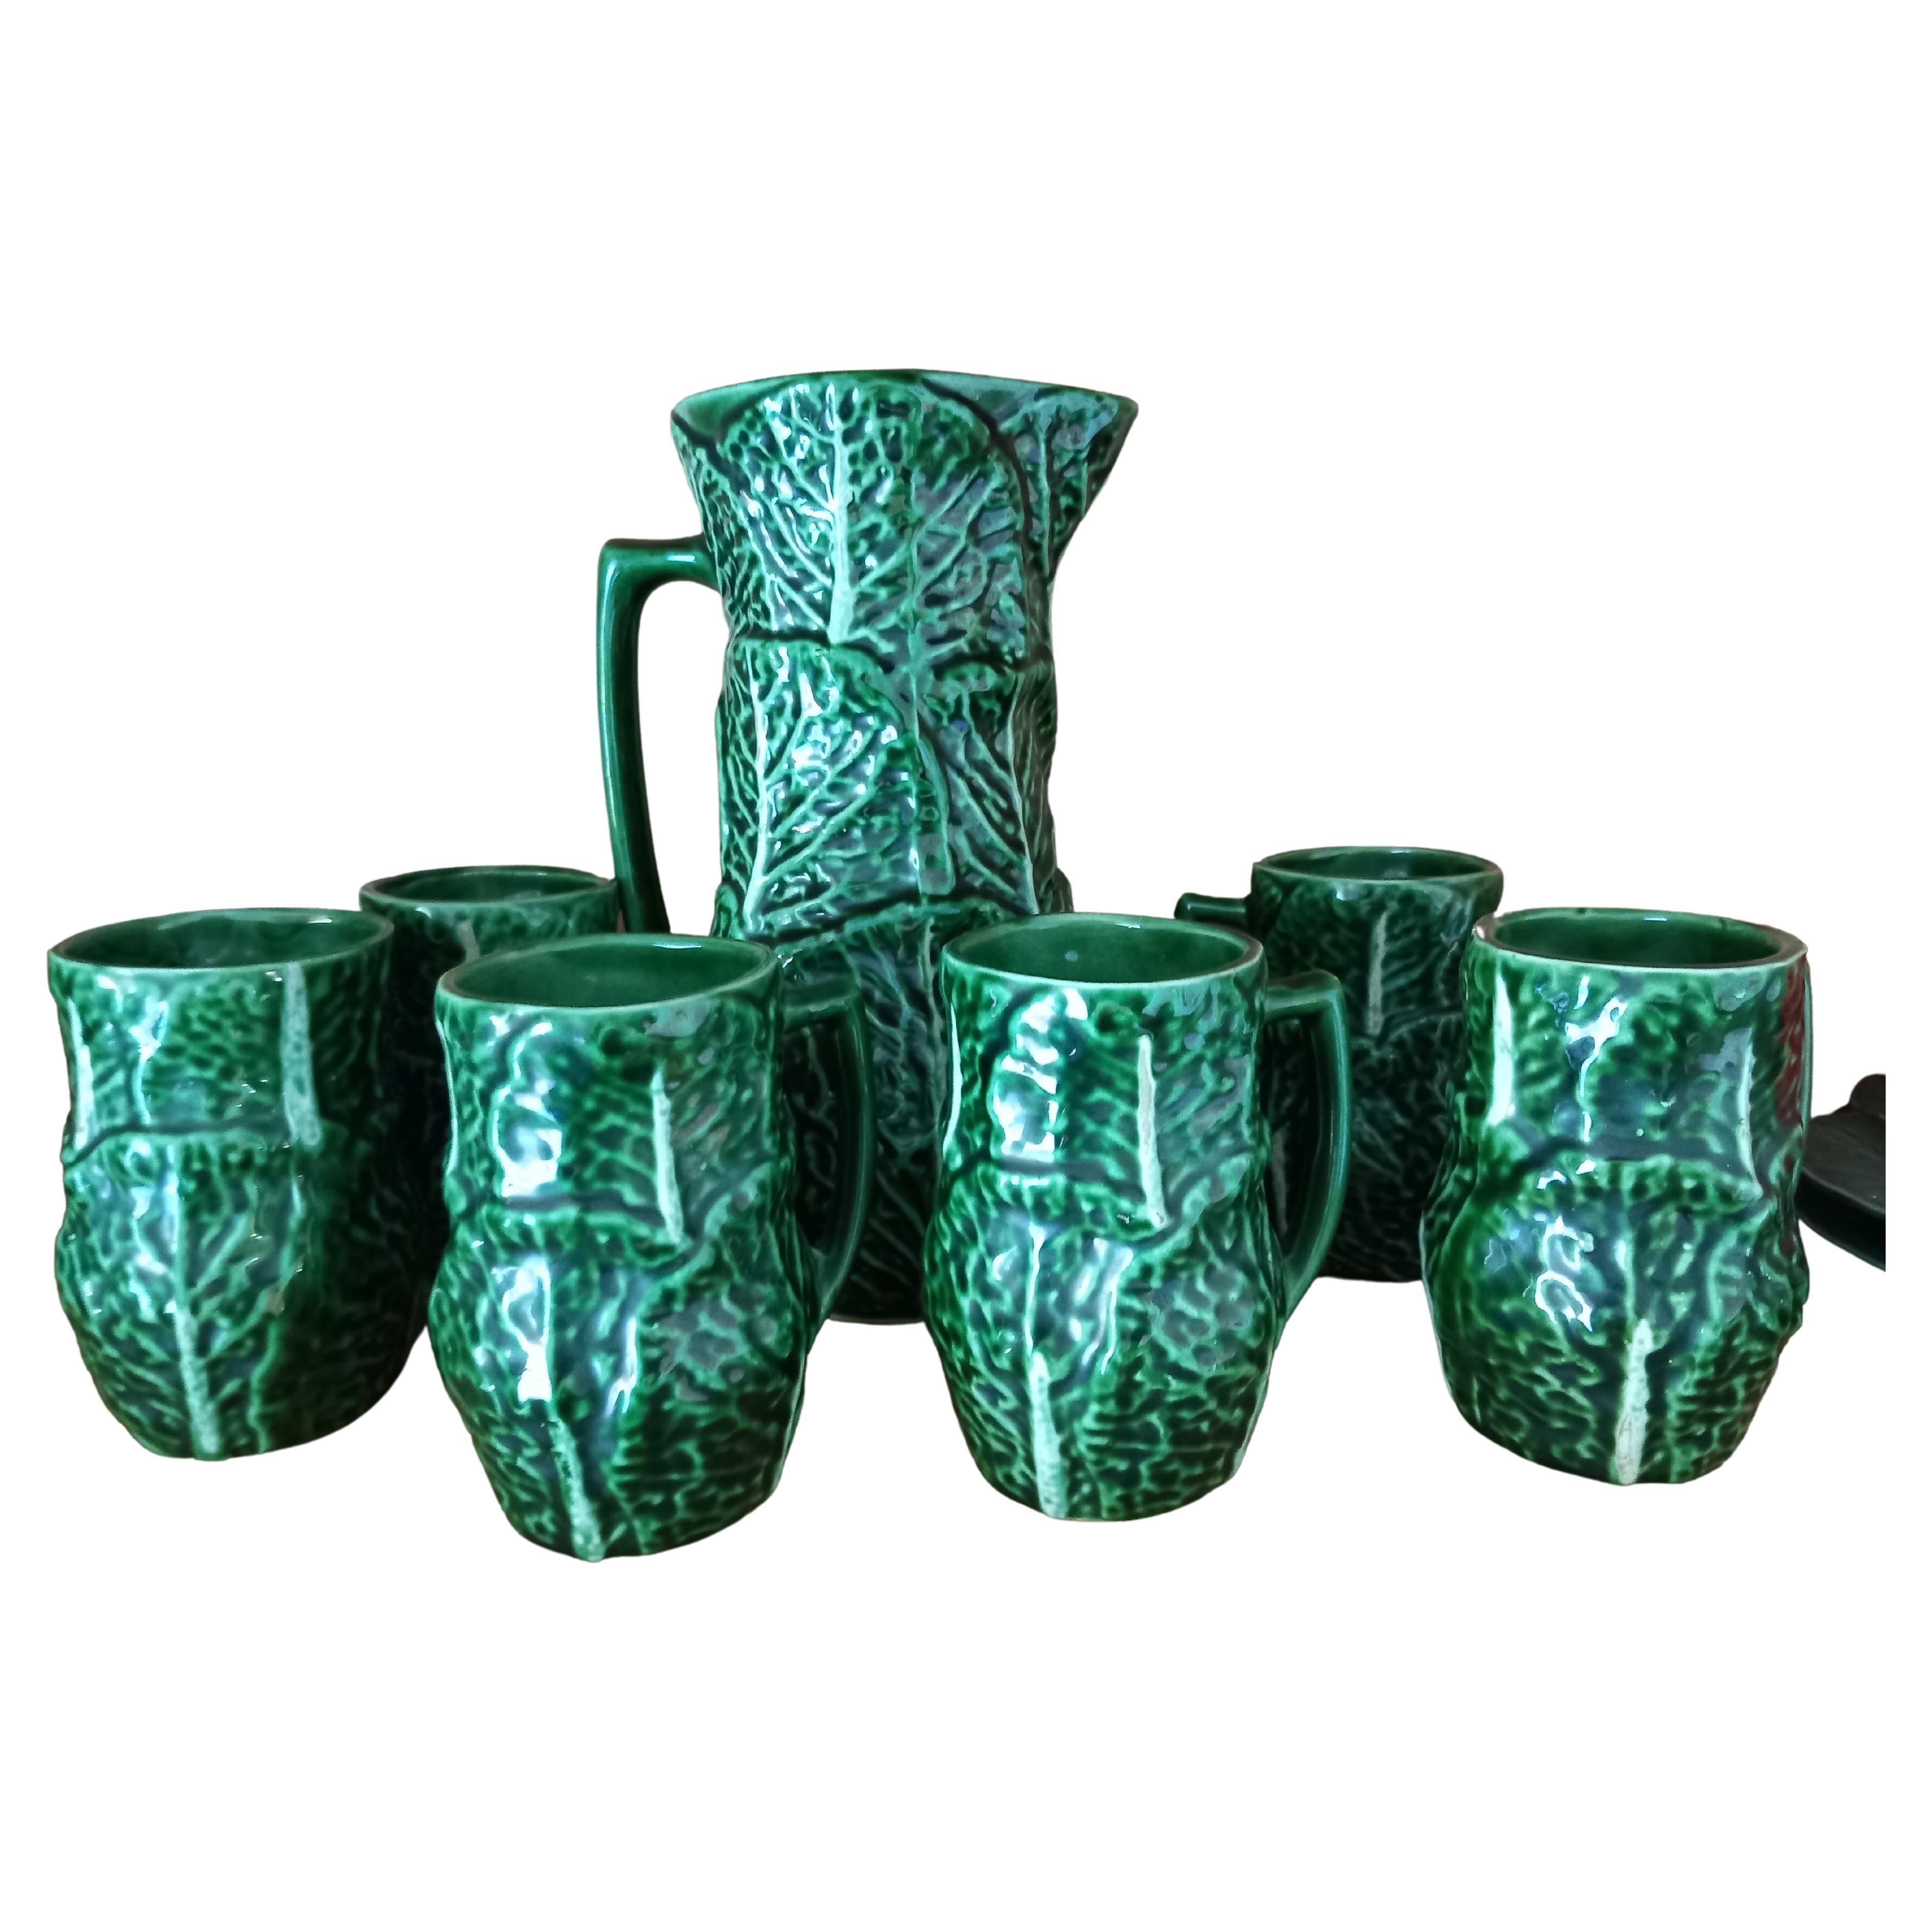 Set Majolica Ceramic Jug and 6 Mug Cups Shape of Cabbage(Price is for the set)